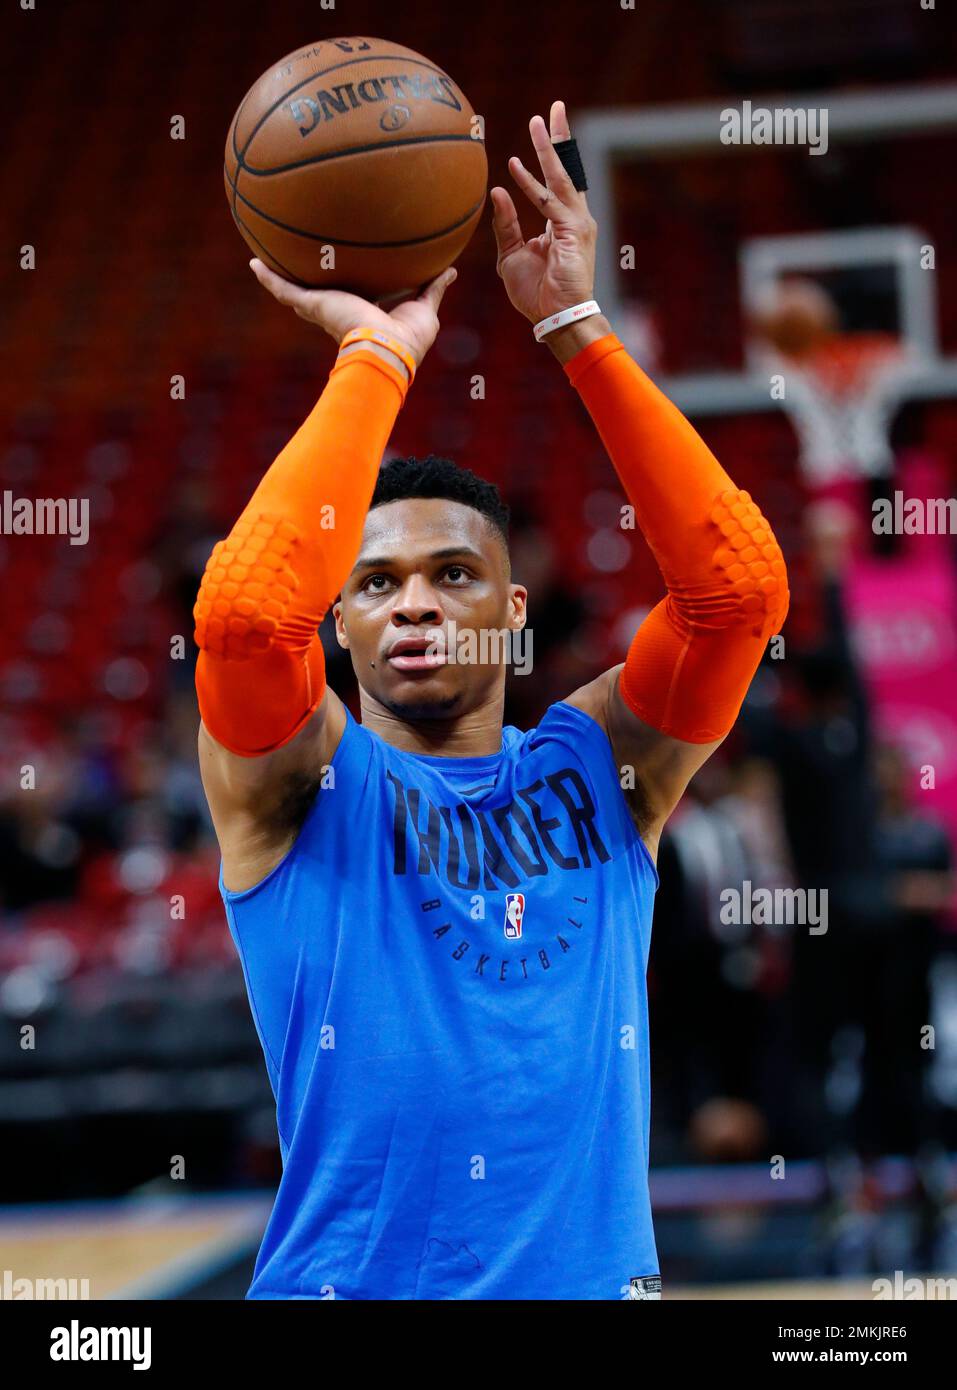 Oklahoma City Thunder guard Russell Westbrook warms up before the start of  an NBA basketball game against the Miami Heat, Friday, Feb. 1, 2019, in  Miami. (AP Photo/Wilfredo Lee Stock Photo - Alamy